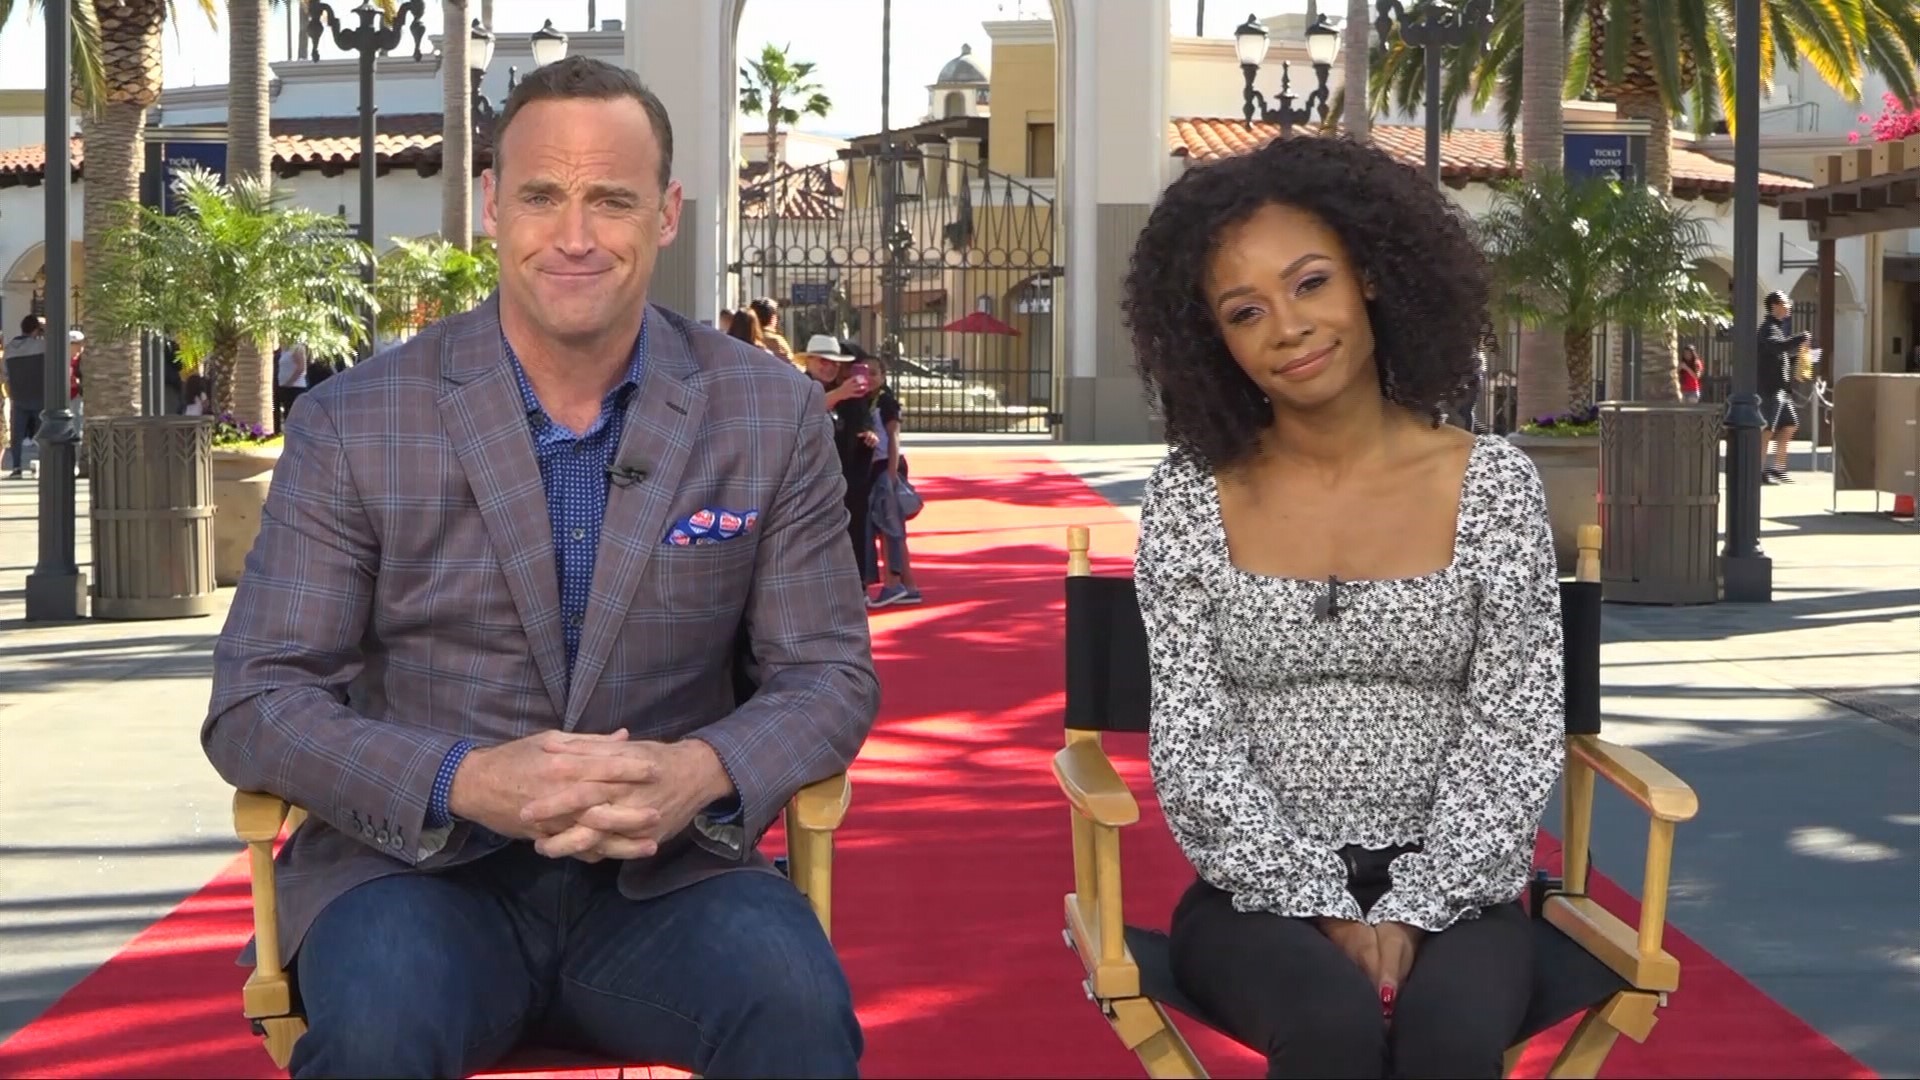 Hosts Matt Iseman and Zuri Hall talk hosting the show from an indoor venue for the first time ever. Facilities provided by NBC.